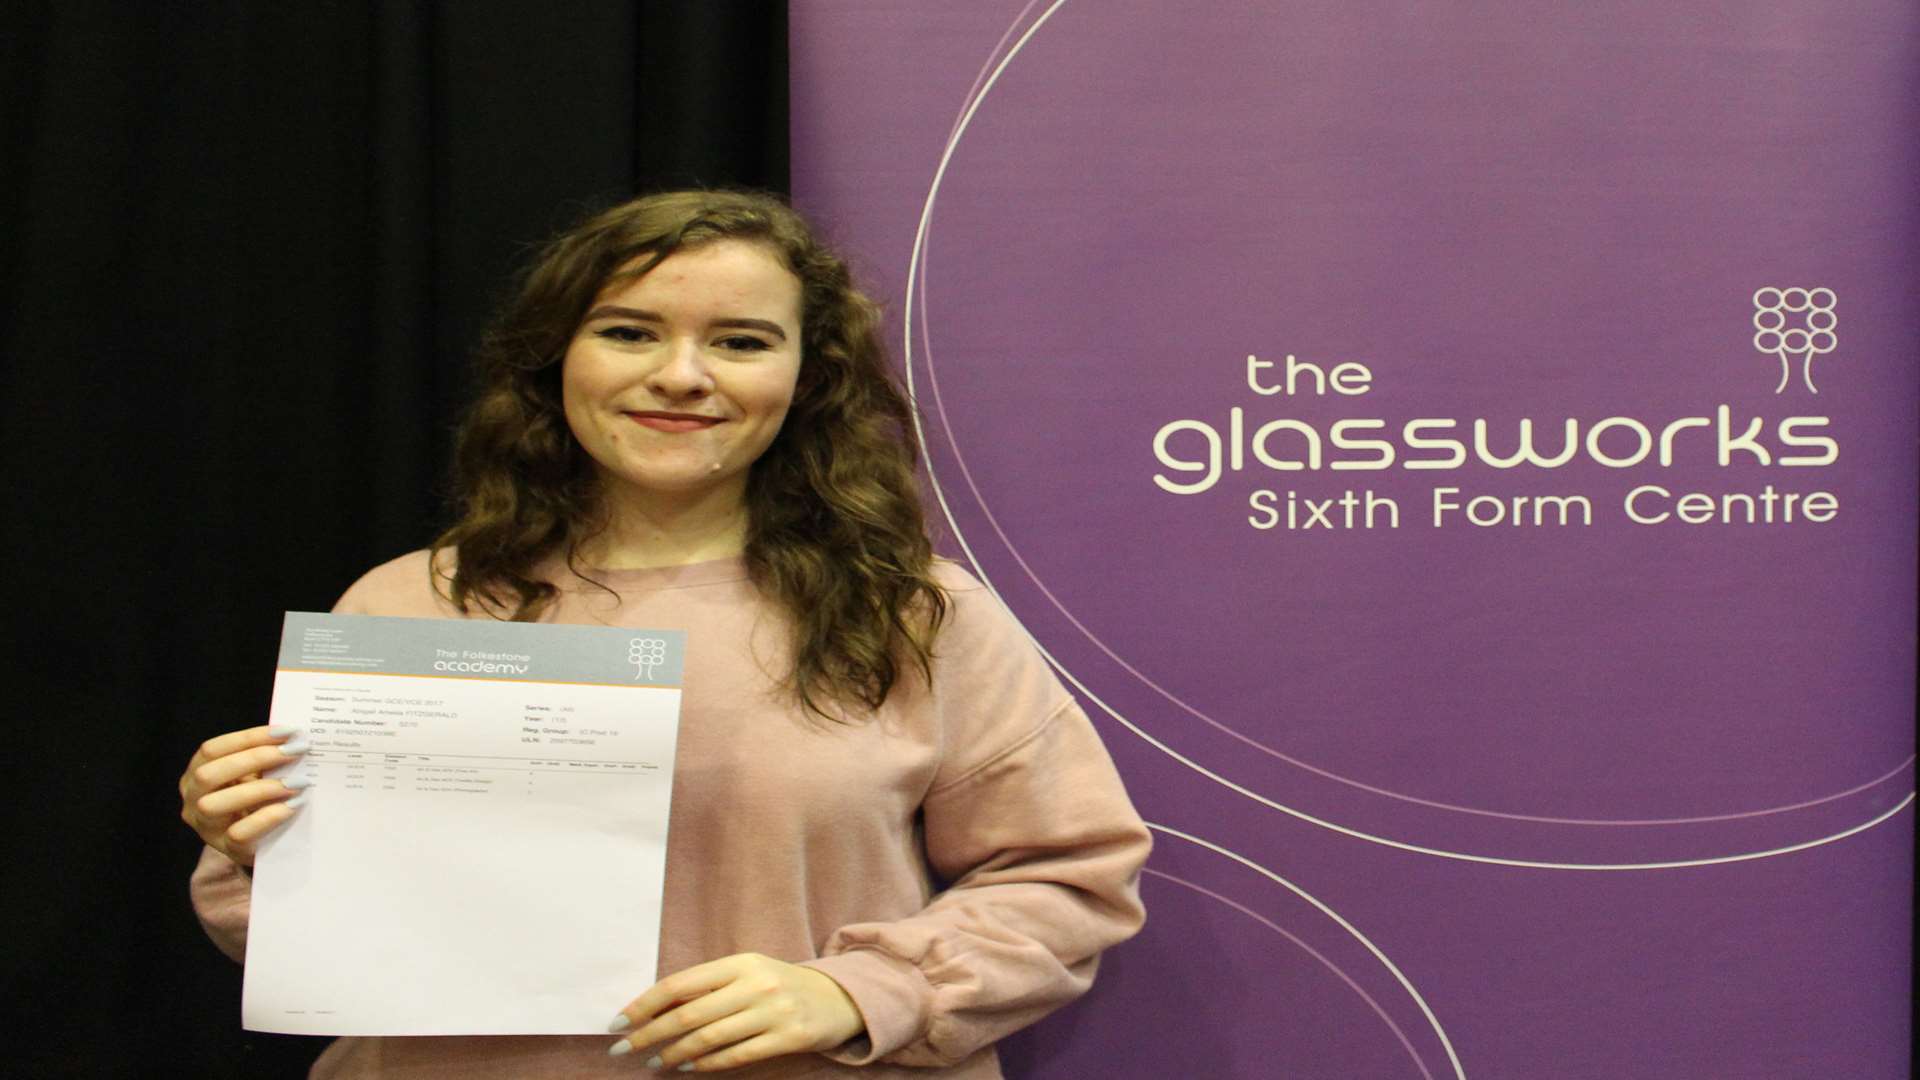 Abigail Fitzgerald achieved an A in Fine Art and Textiles and a C in Photography